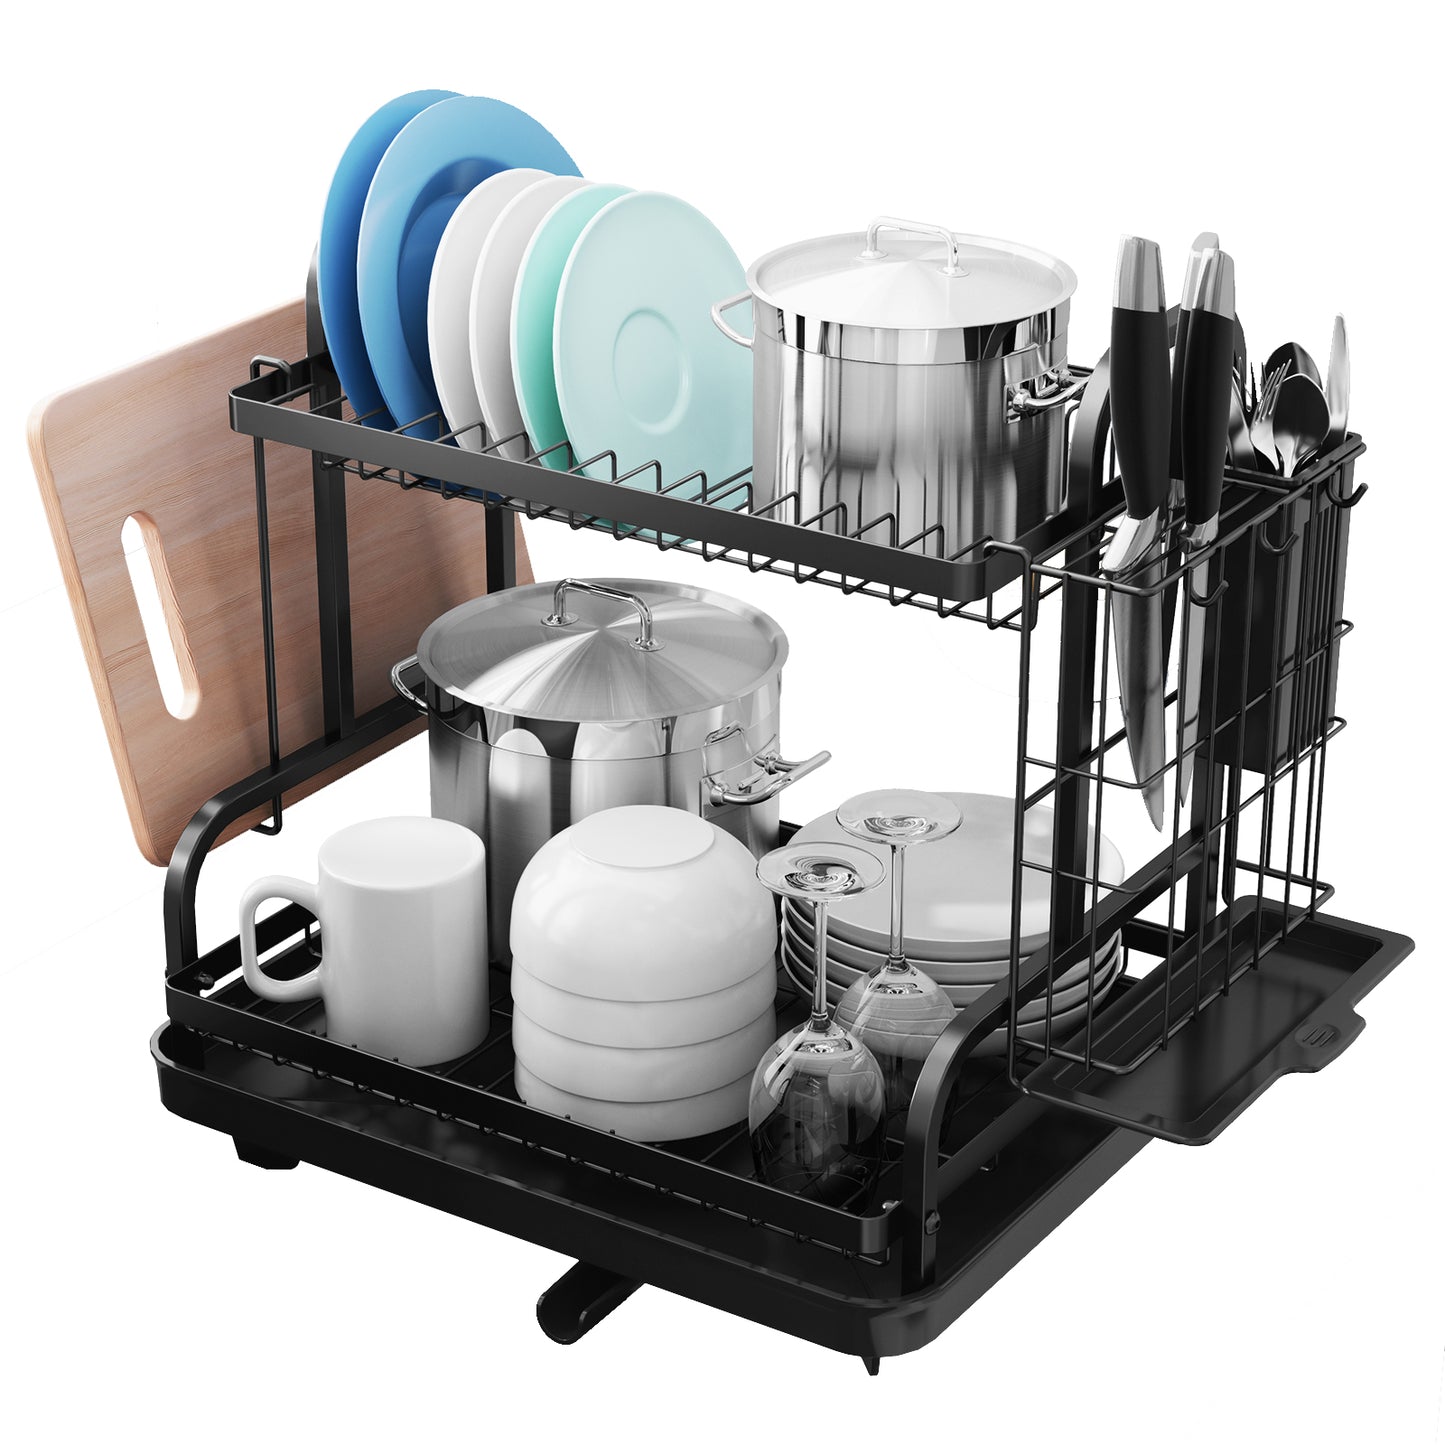 Dish Drying Rack With Drainboard,2 Tier Rustproof Sturdy Over The